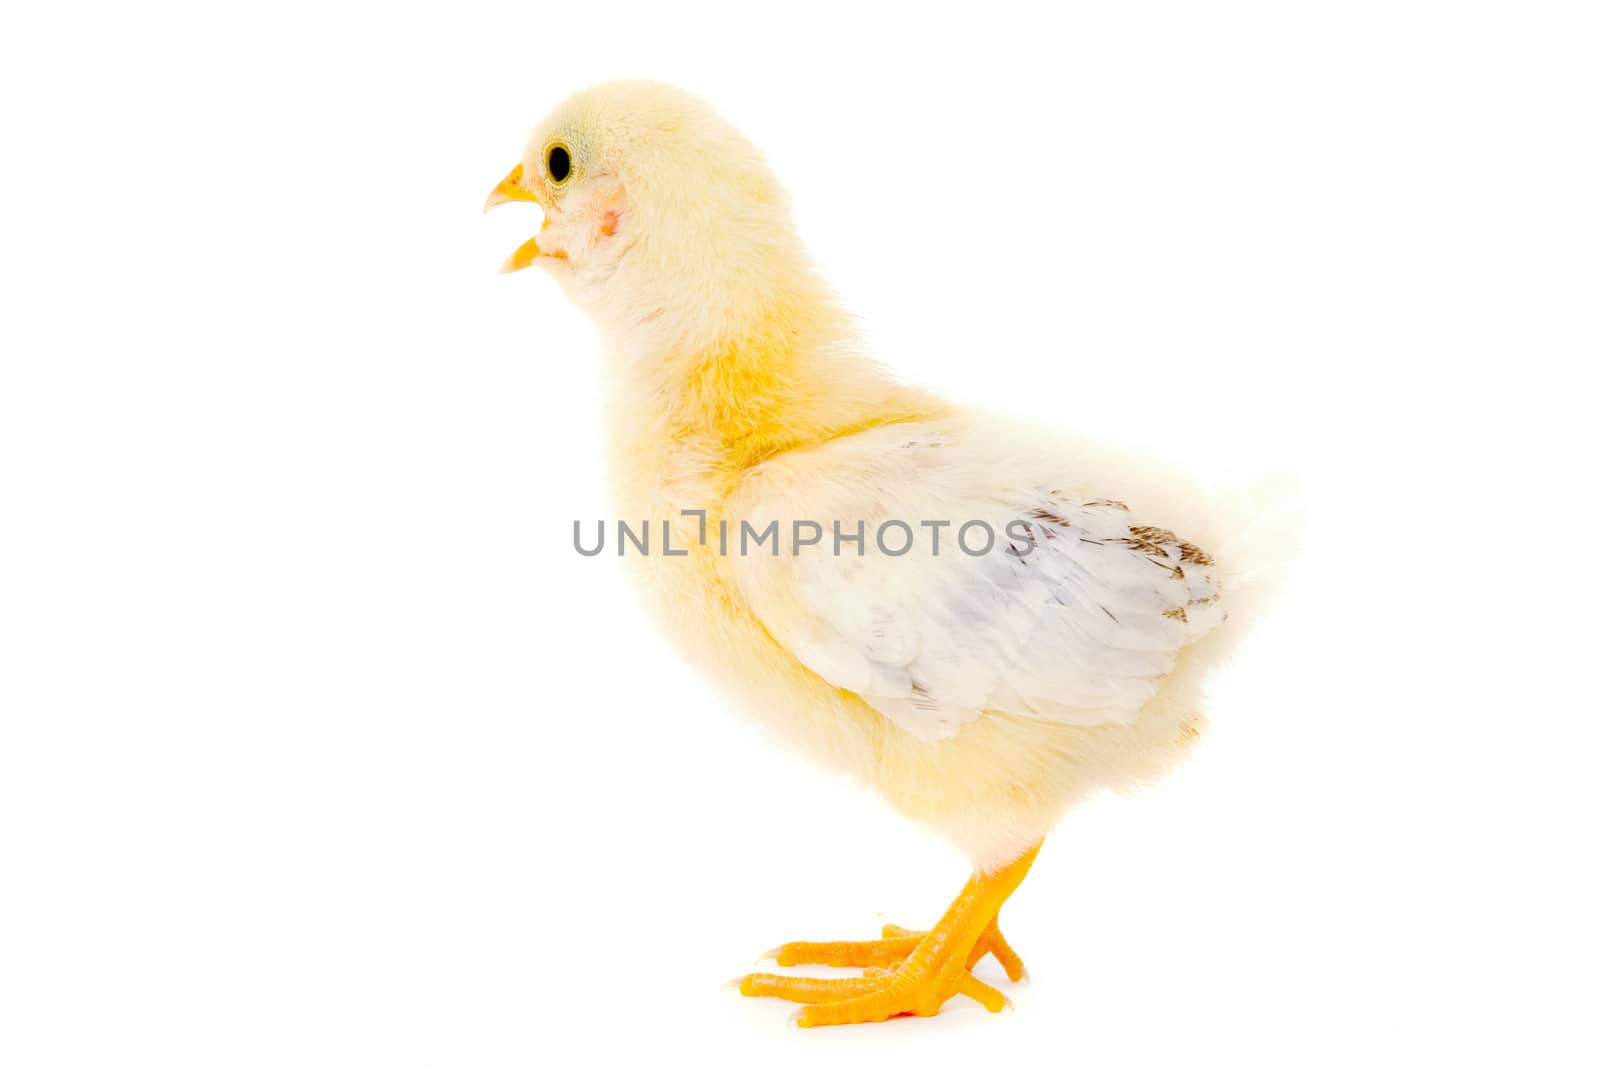 Sweet baby chicken is standing on a clean white background.